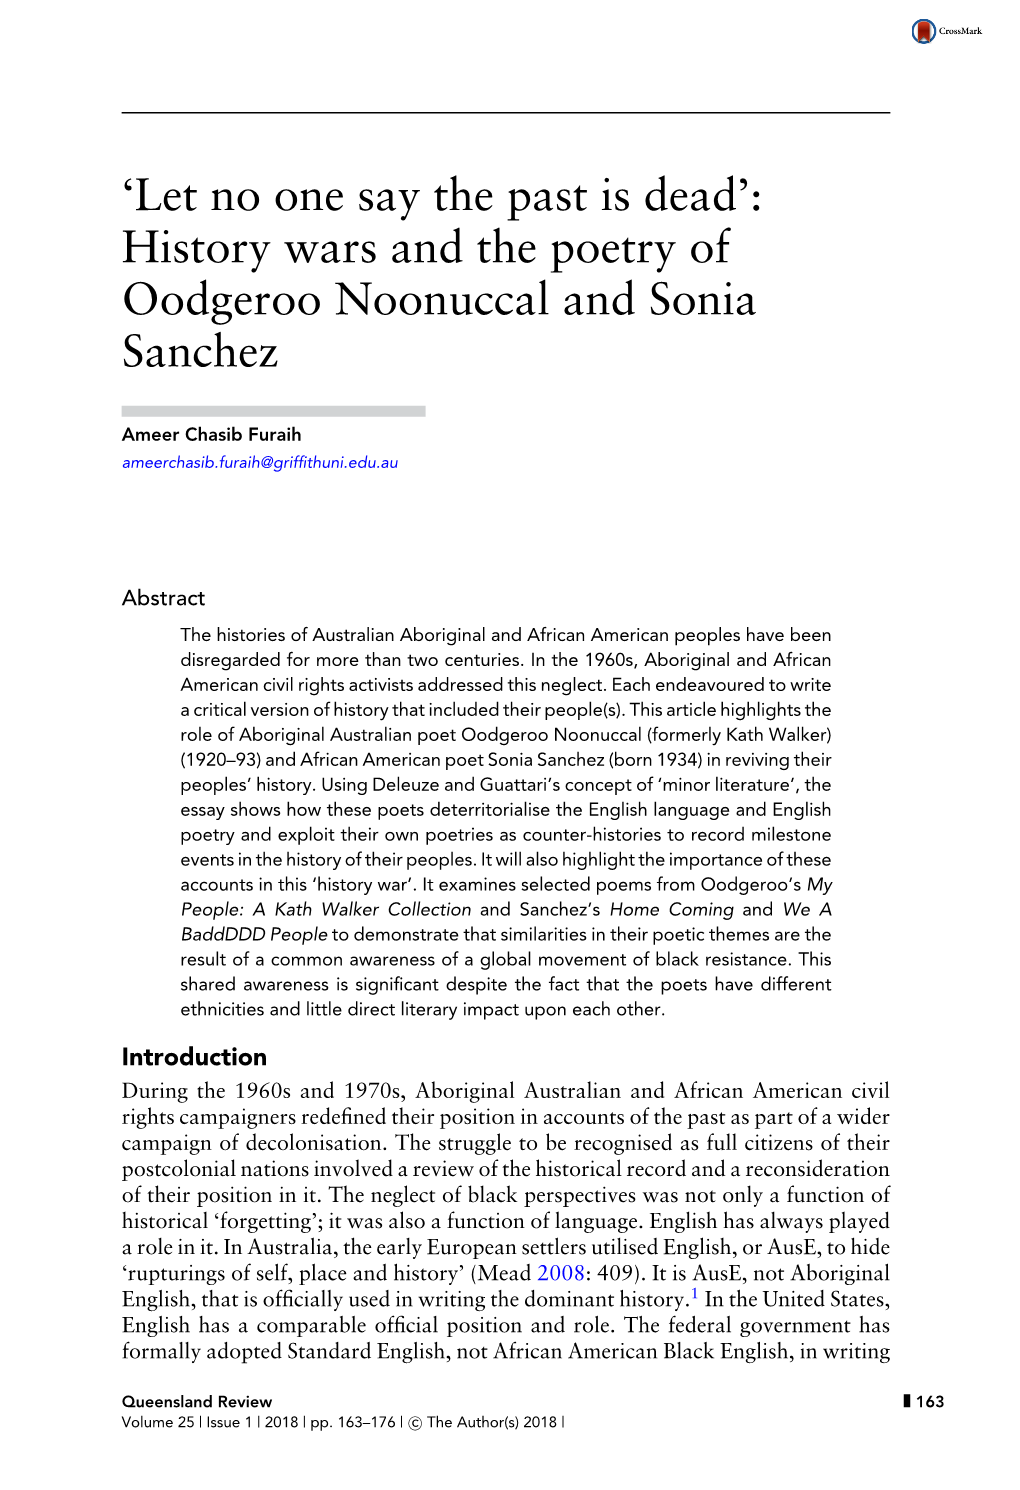 History Wars and the Poetry of Oodgeroo Noonuccal and Sonia Sanchez